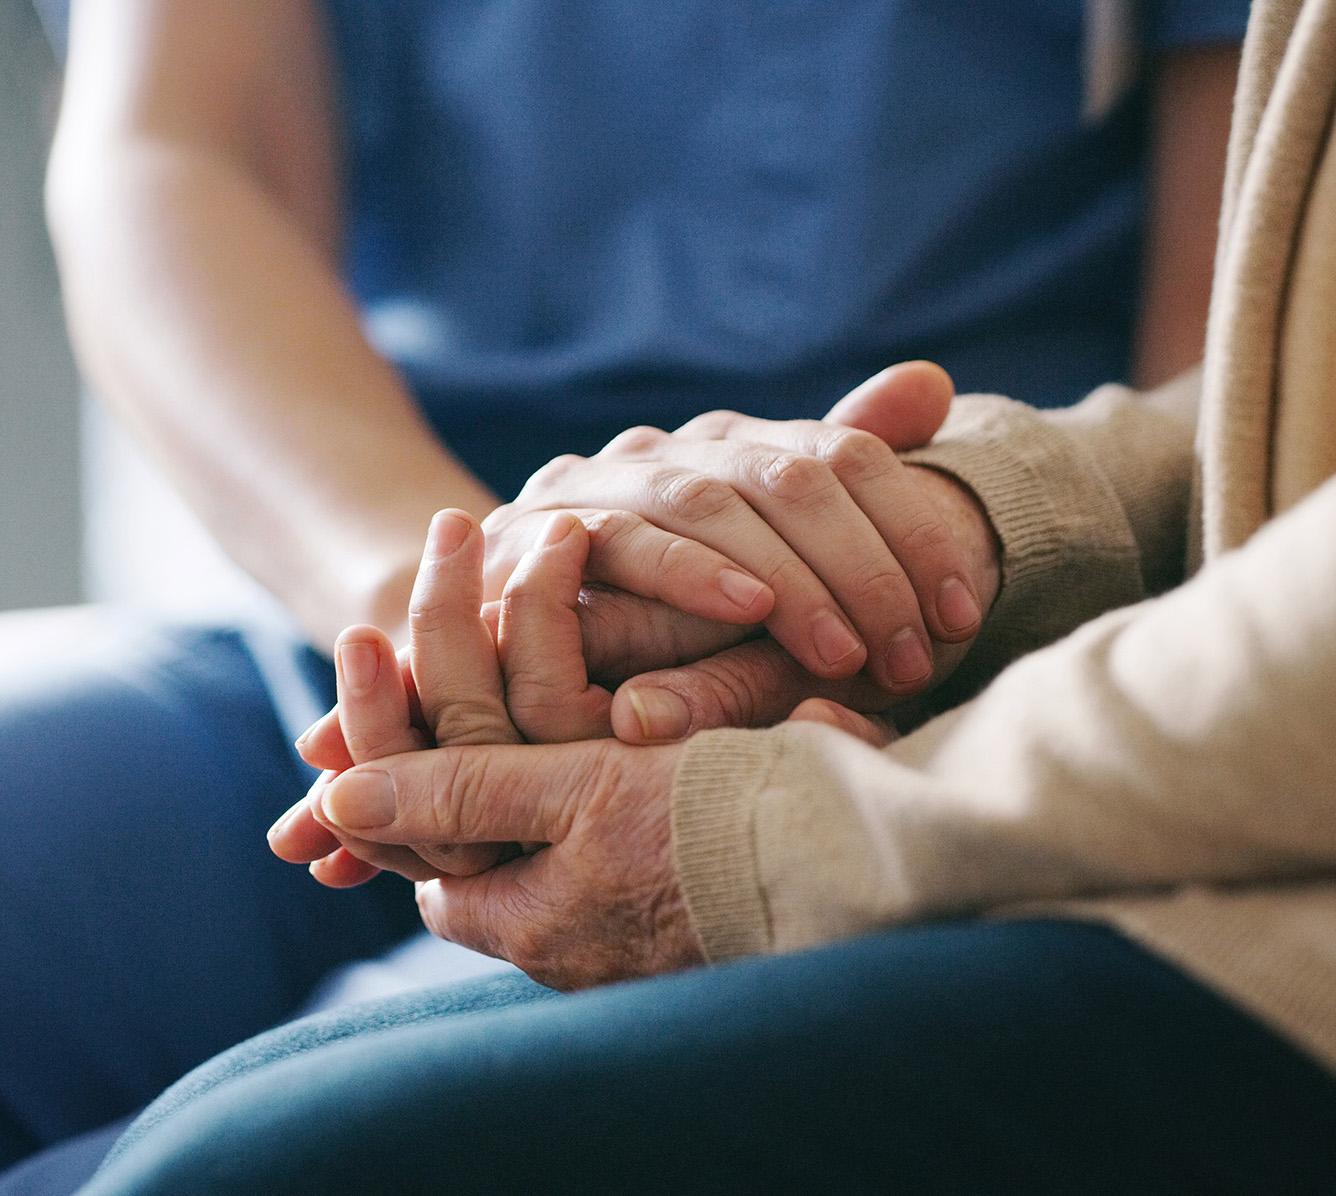 A nurse holding the hand of an elderly patient.